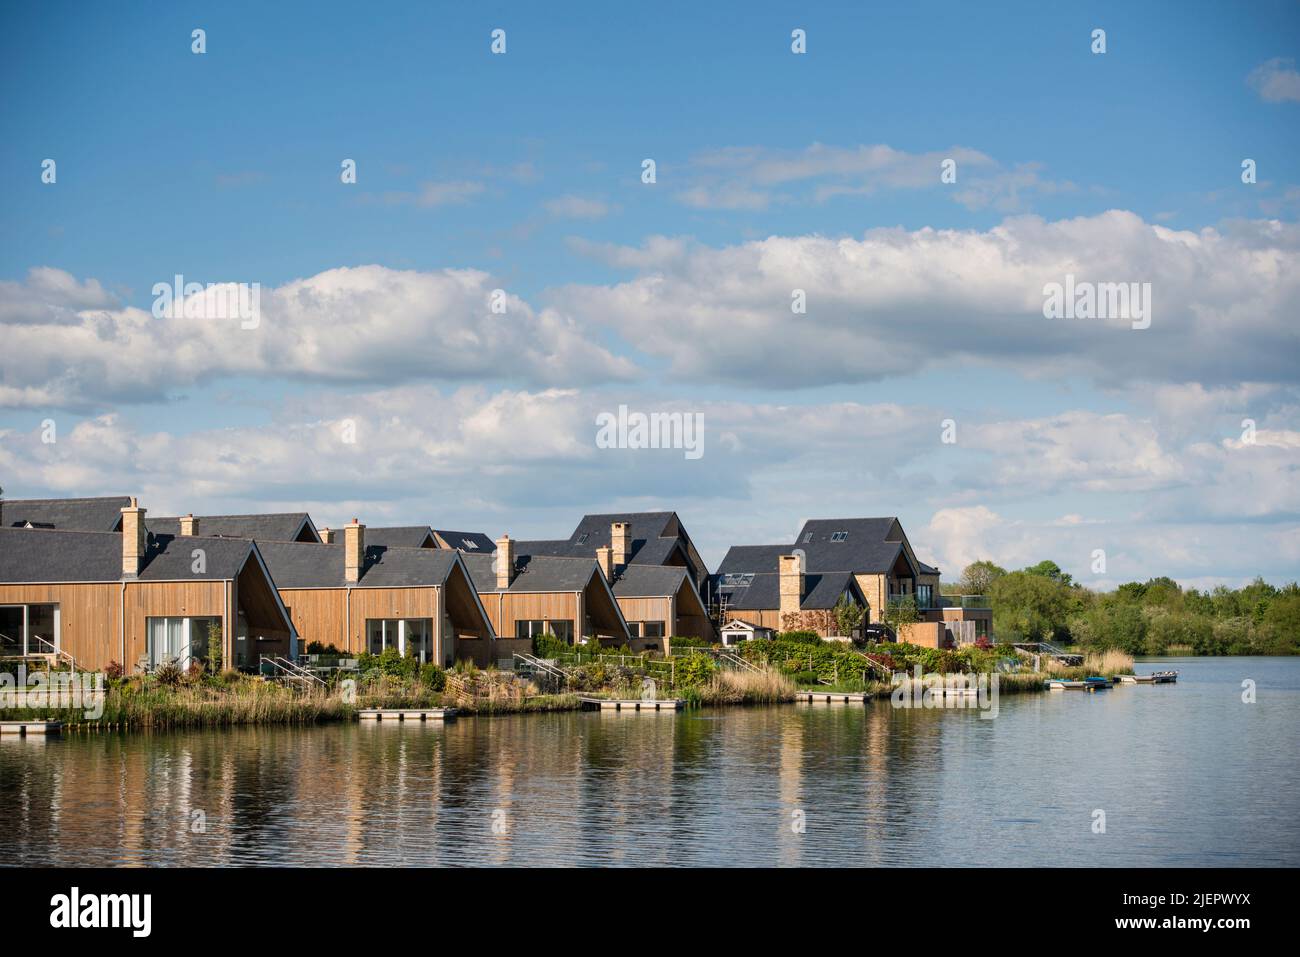 Lakeside residential luxury properties with private jetty, South Cerney, Gloucestershire, UK Stock Photo